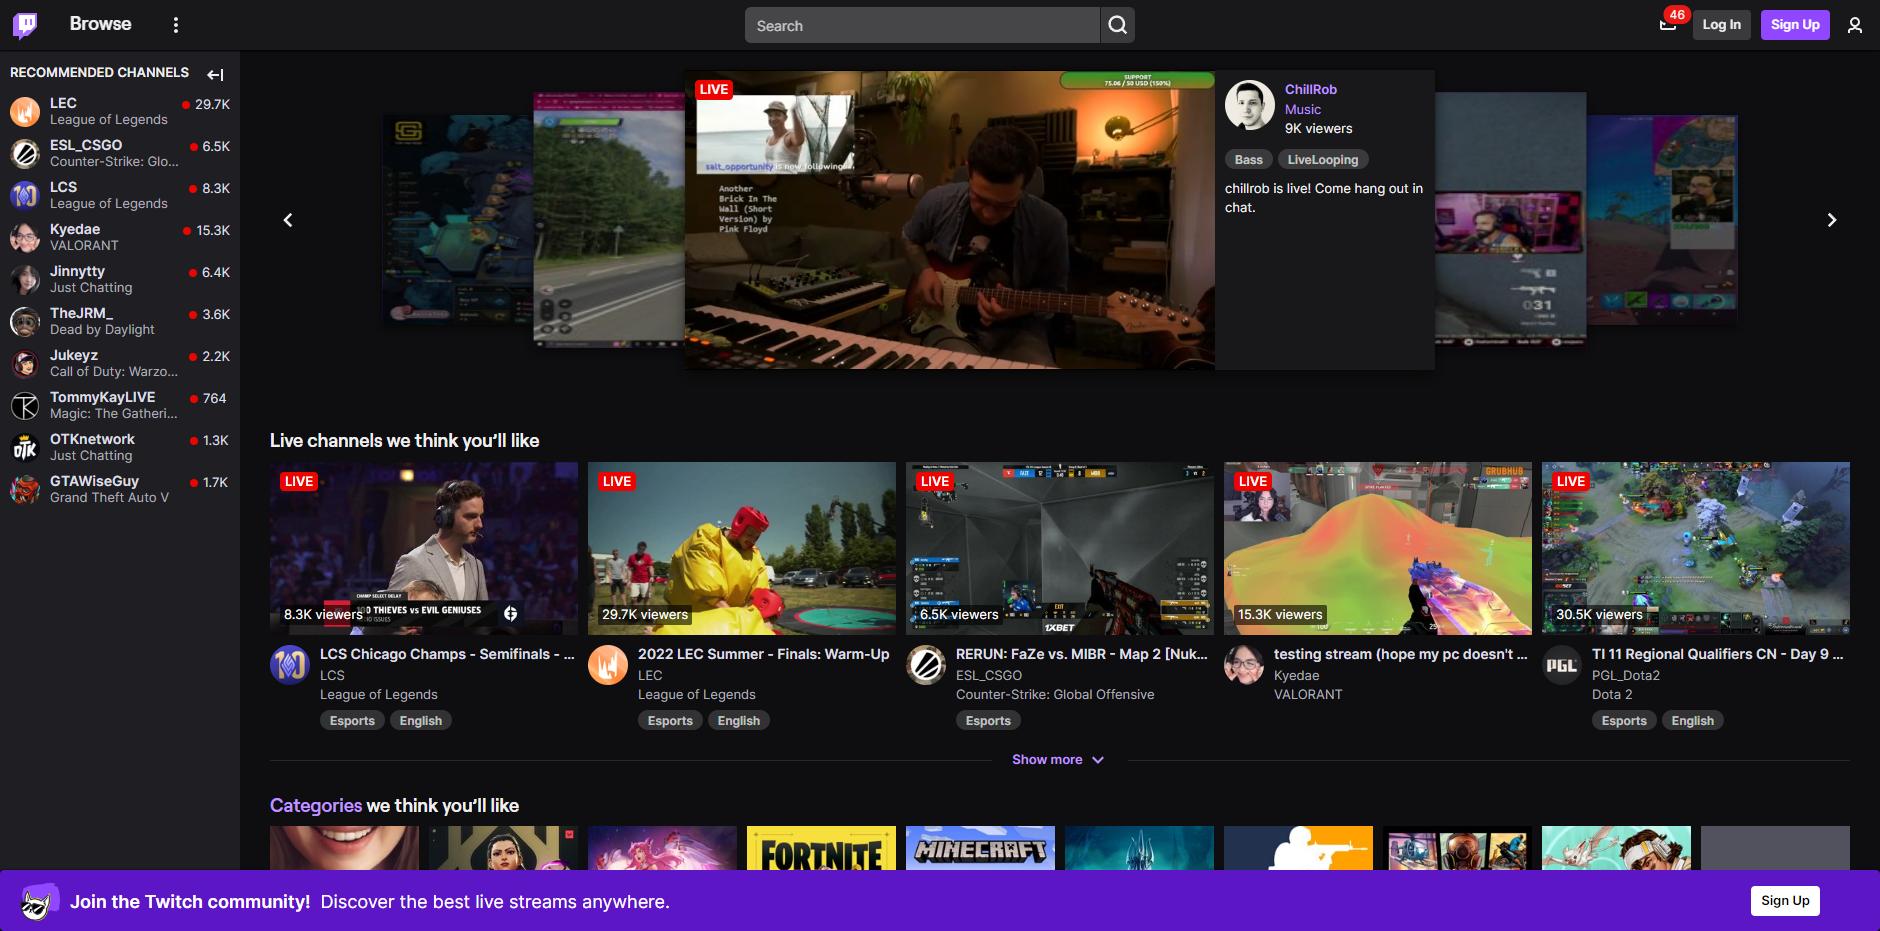 The Complete Guide To Streaming On Twitch And How To Make It A Successful Career. How To Build An Audience And Connect With Your Community.